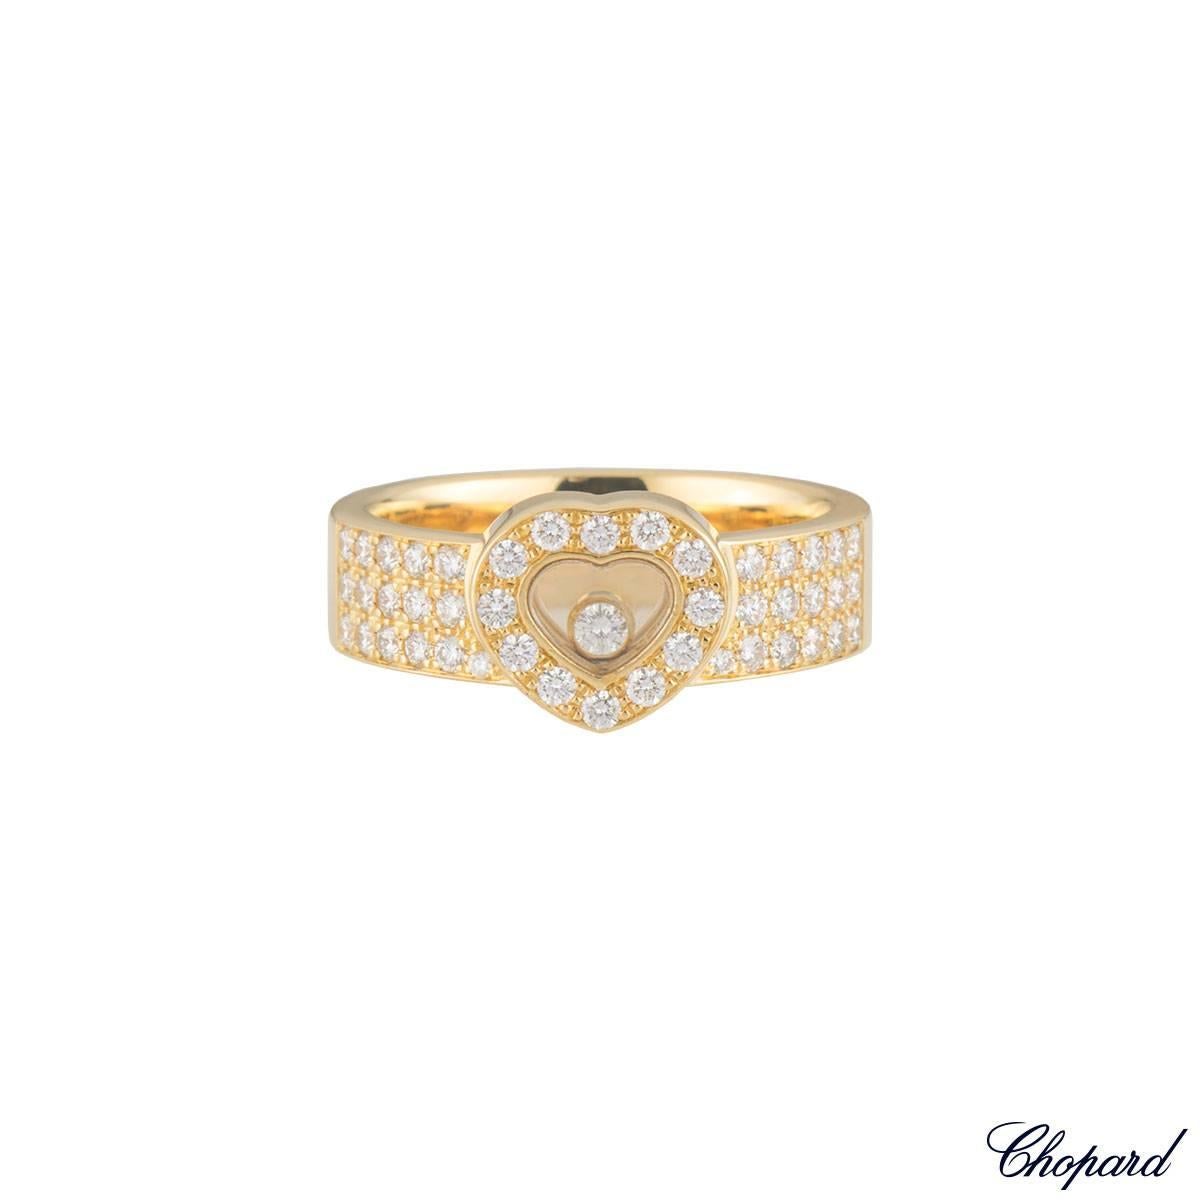 A sparkly 18k yellow gold Chopard diamond ring from the Happy Diamonds collection. The ring comprises of the iconic 2 glass pane motifs in a heart shape with a round brilliant cut diamond floating freely in a rubover setting. The heart motif has